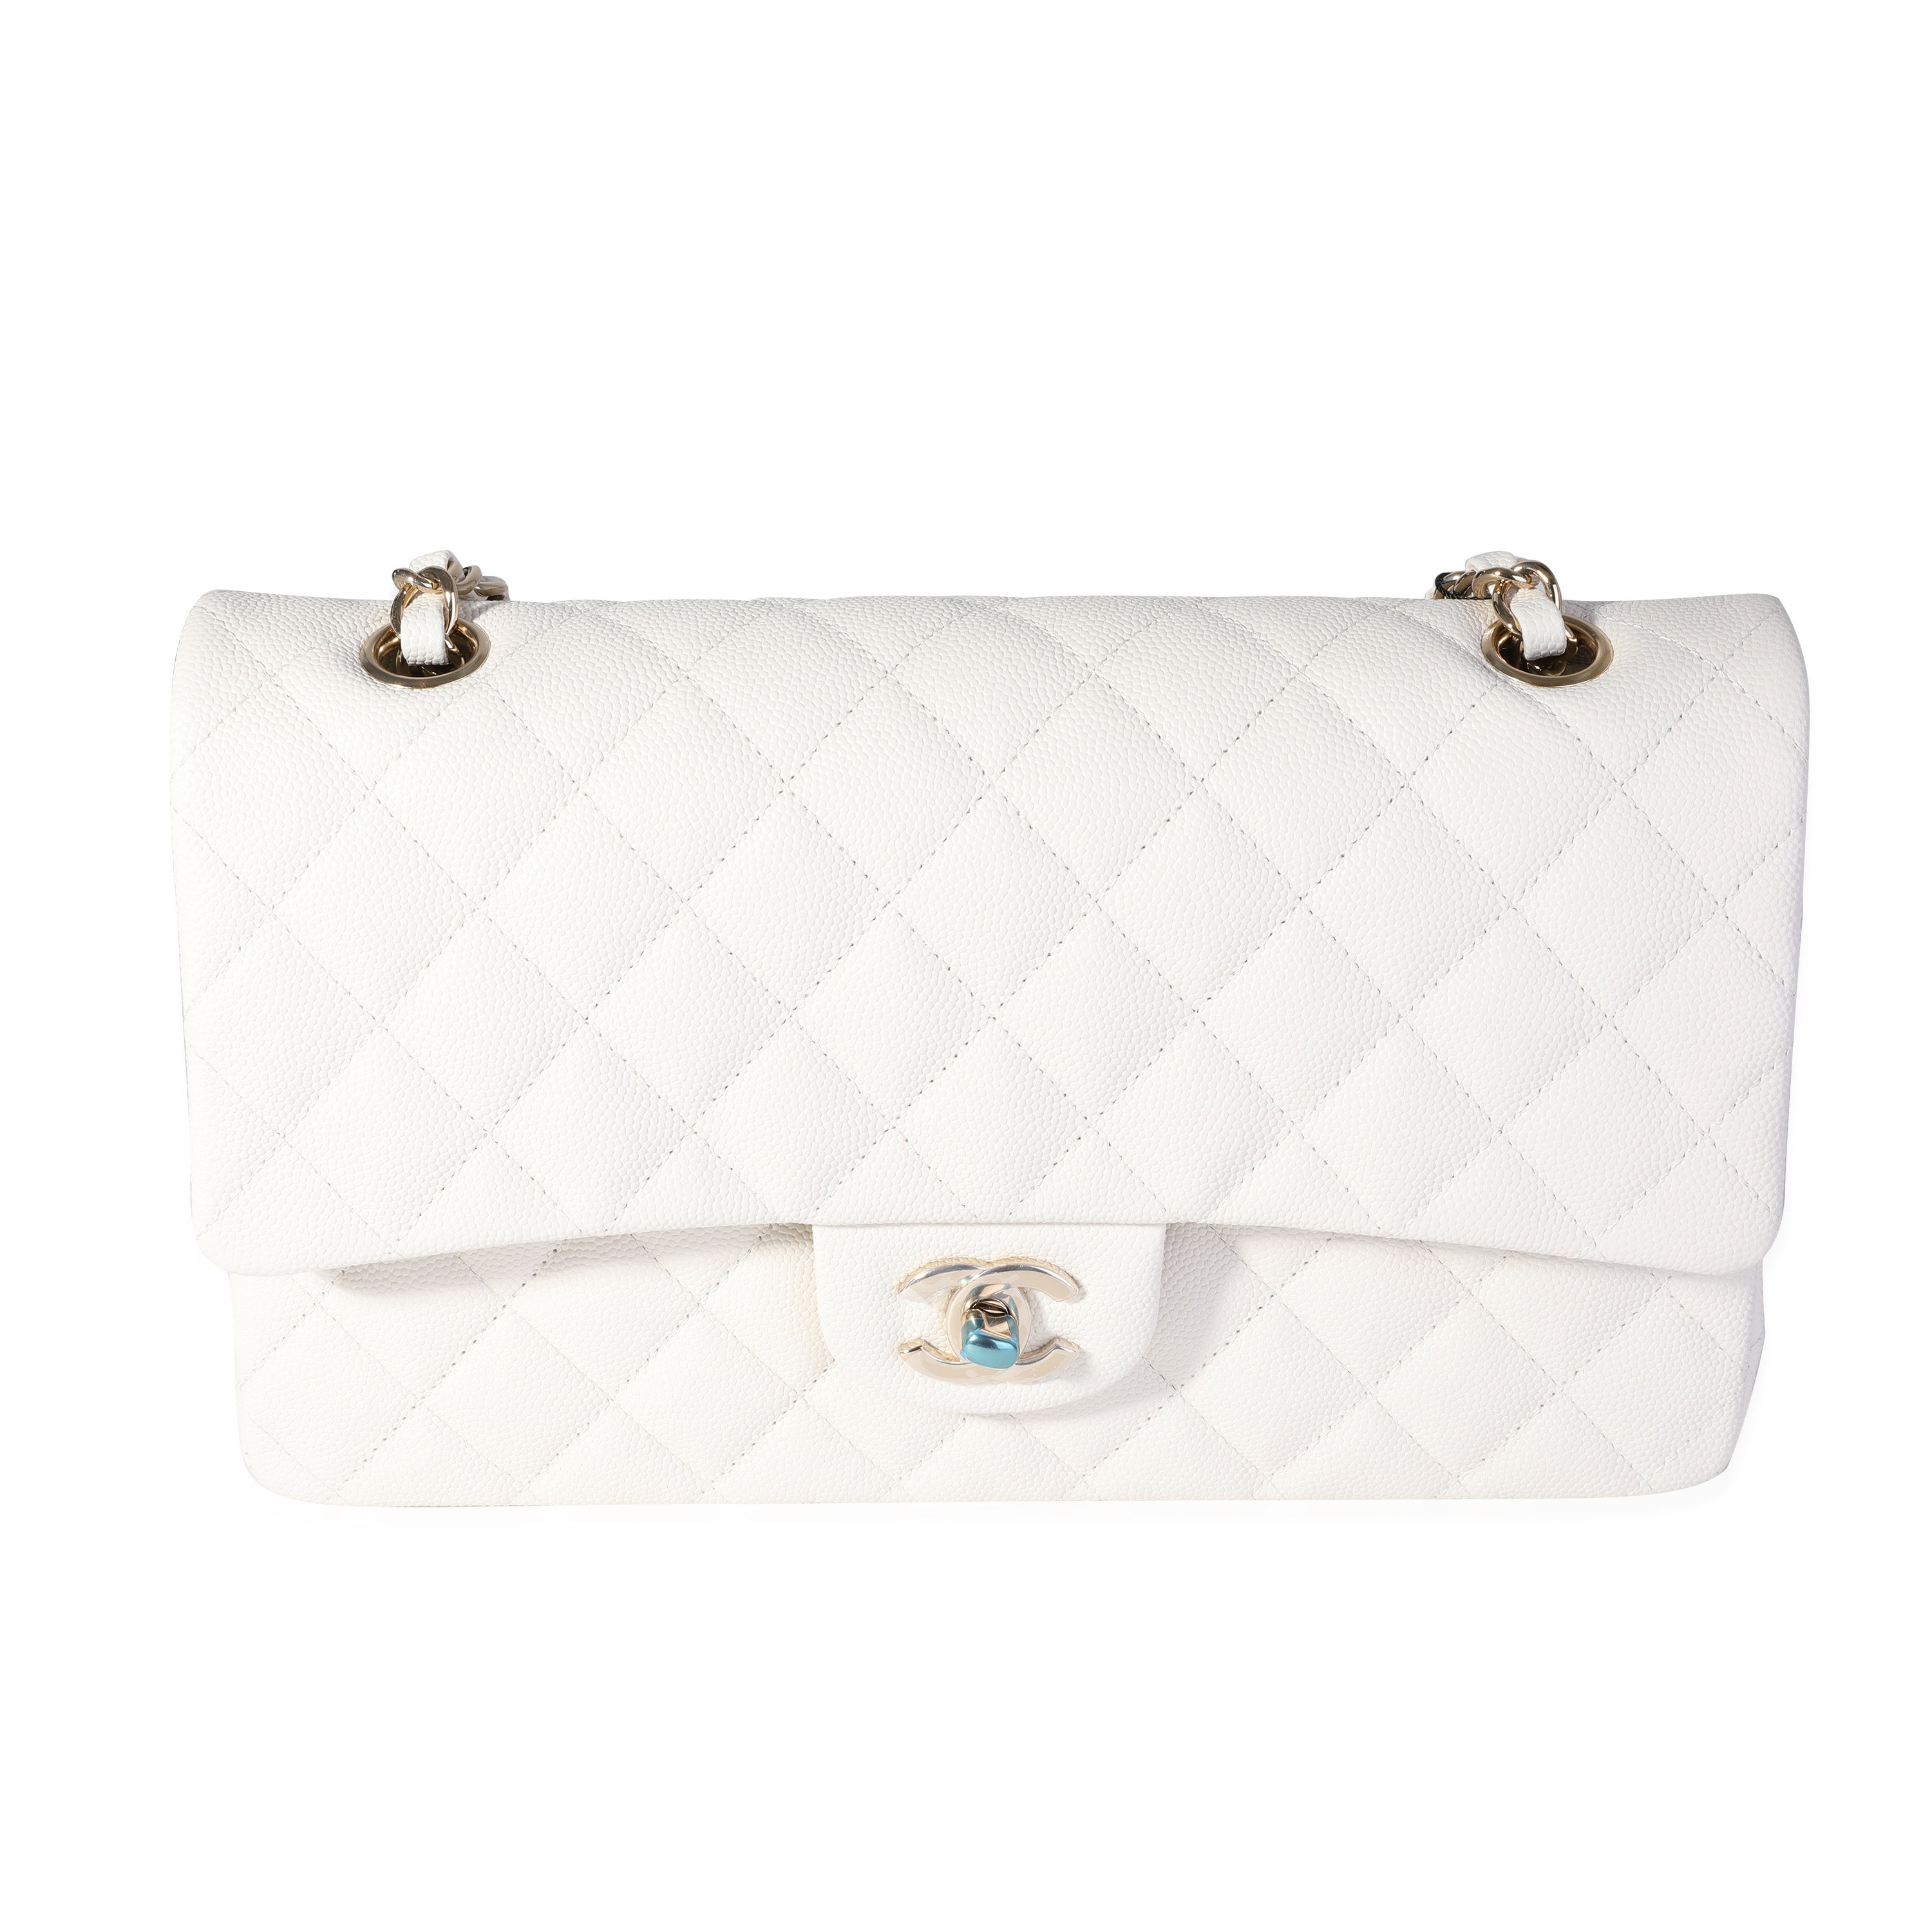 Chanel White Quilted Caviar Medium Classic Double Flap Bag  myGemma  Item  116650